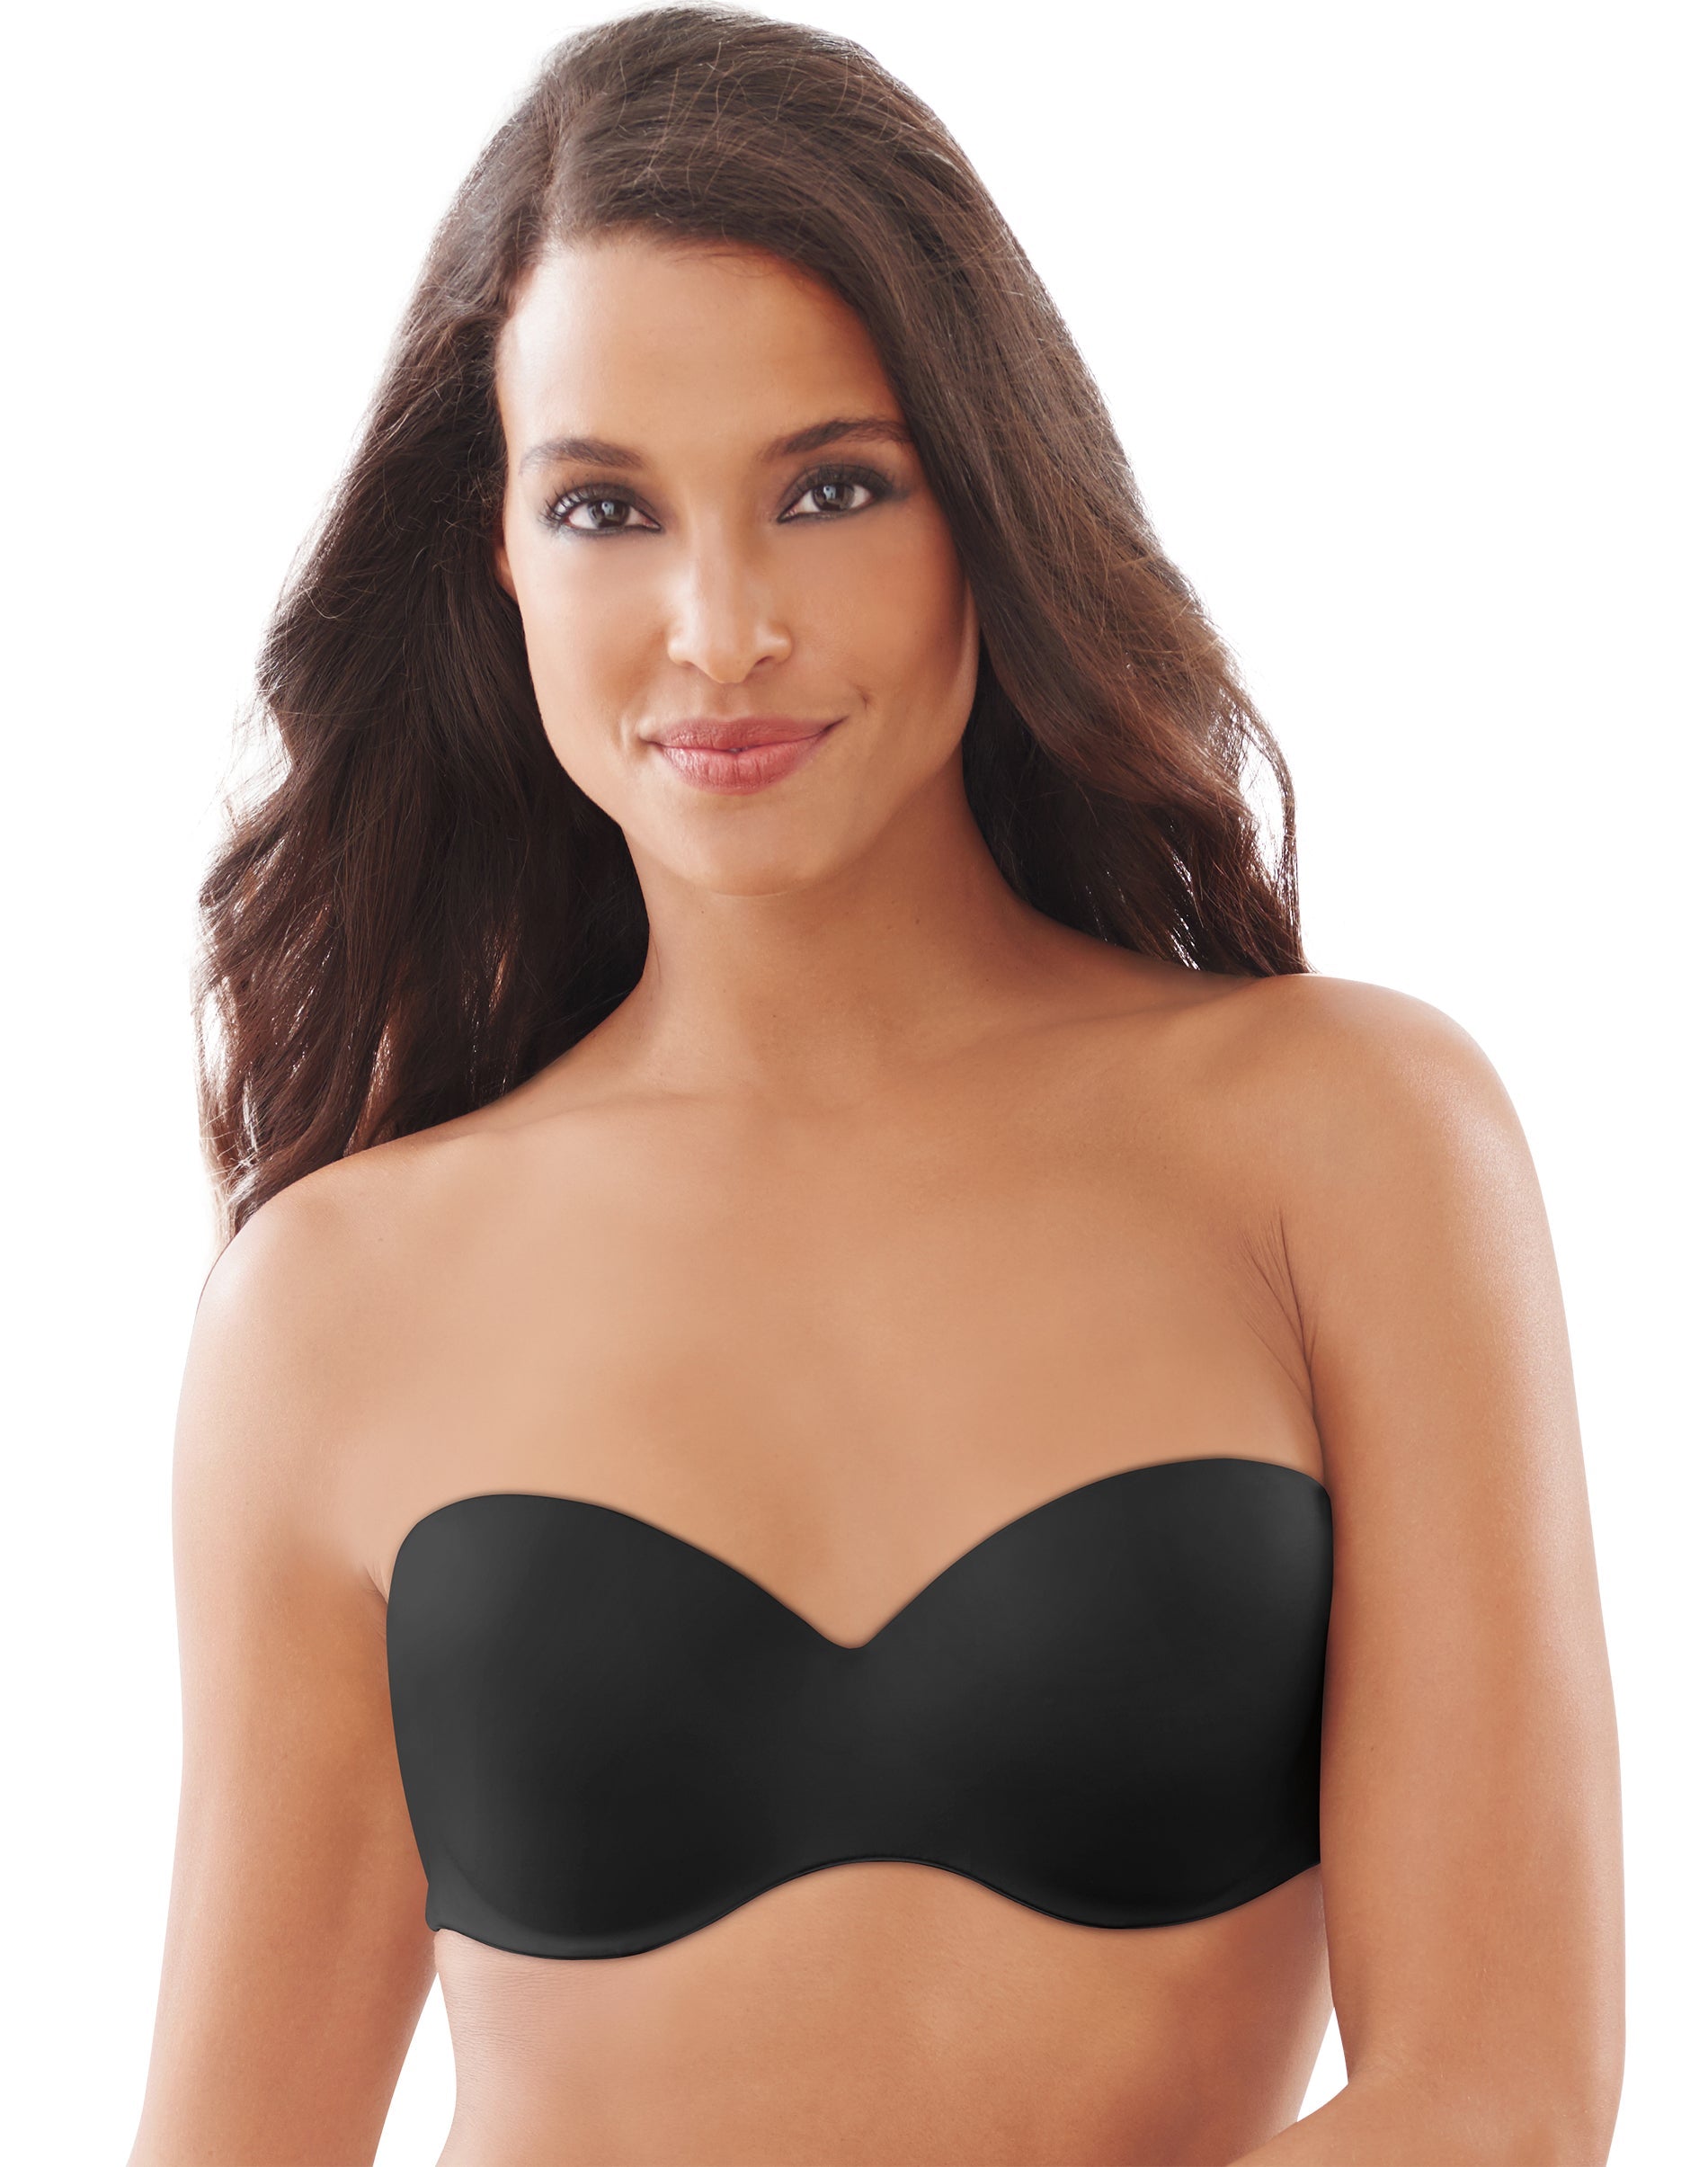 Women's Convertible Bras: Shop Essential Multi-Way Bras For Any Outfit